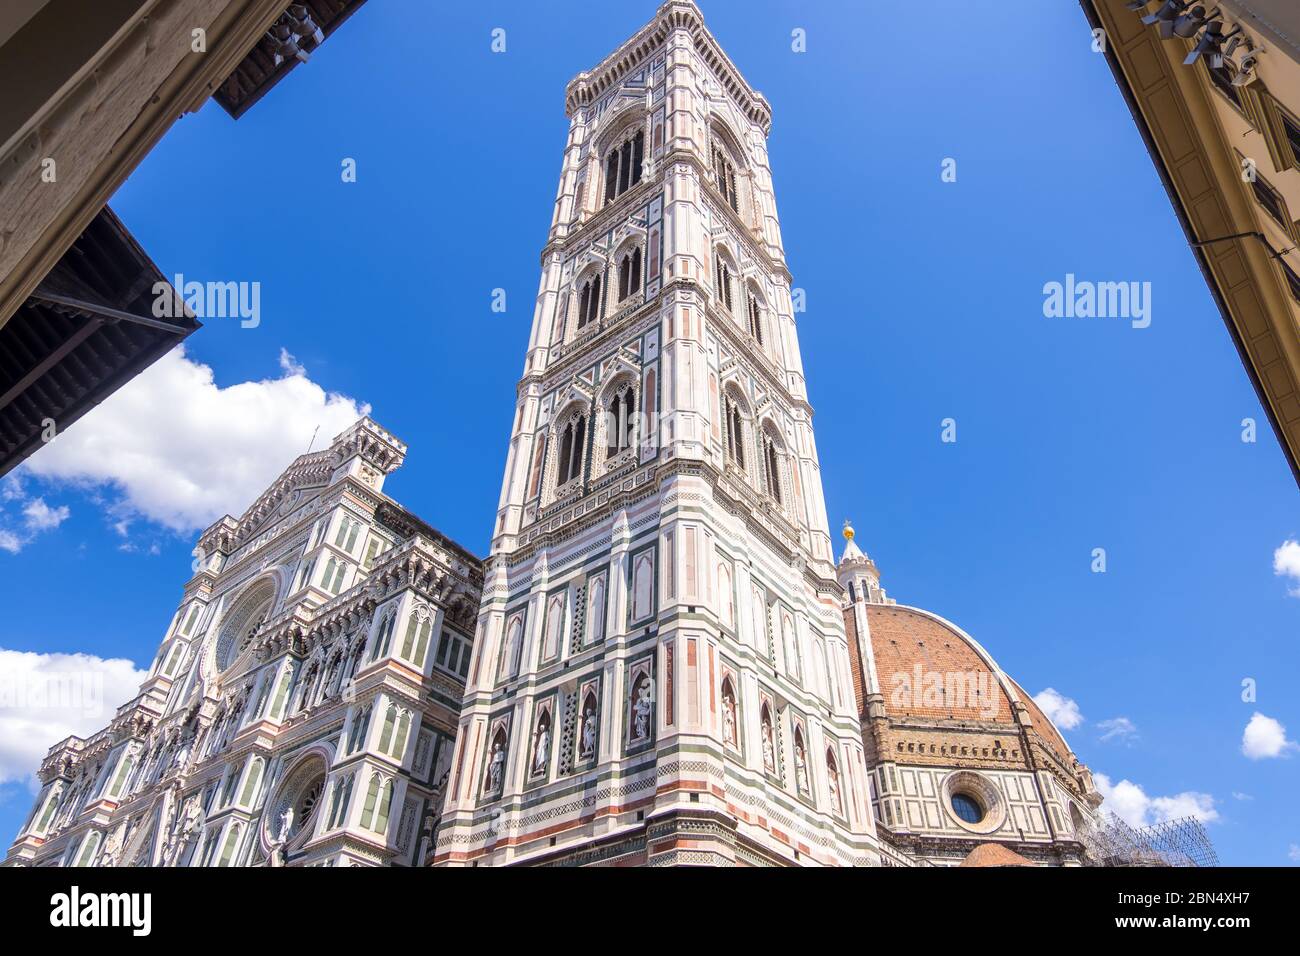 Florence, Italy - August 16, 2019: Cathedral Santa Maria Del Fiore and Giotto's Campanile on Piazza del Duomo in Florence Stock Photo